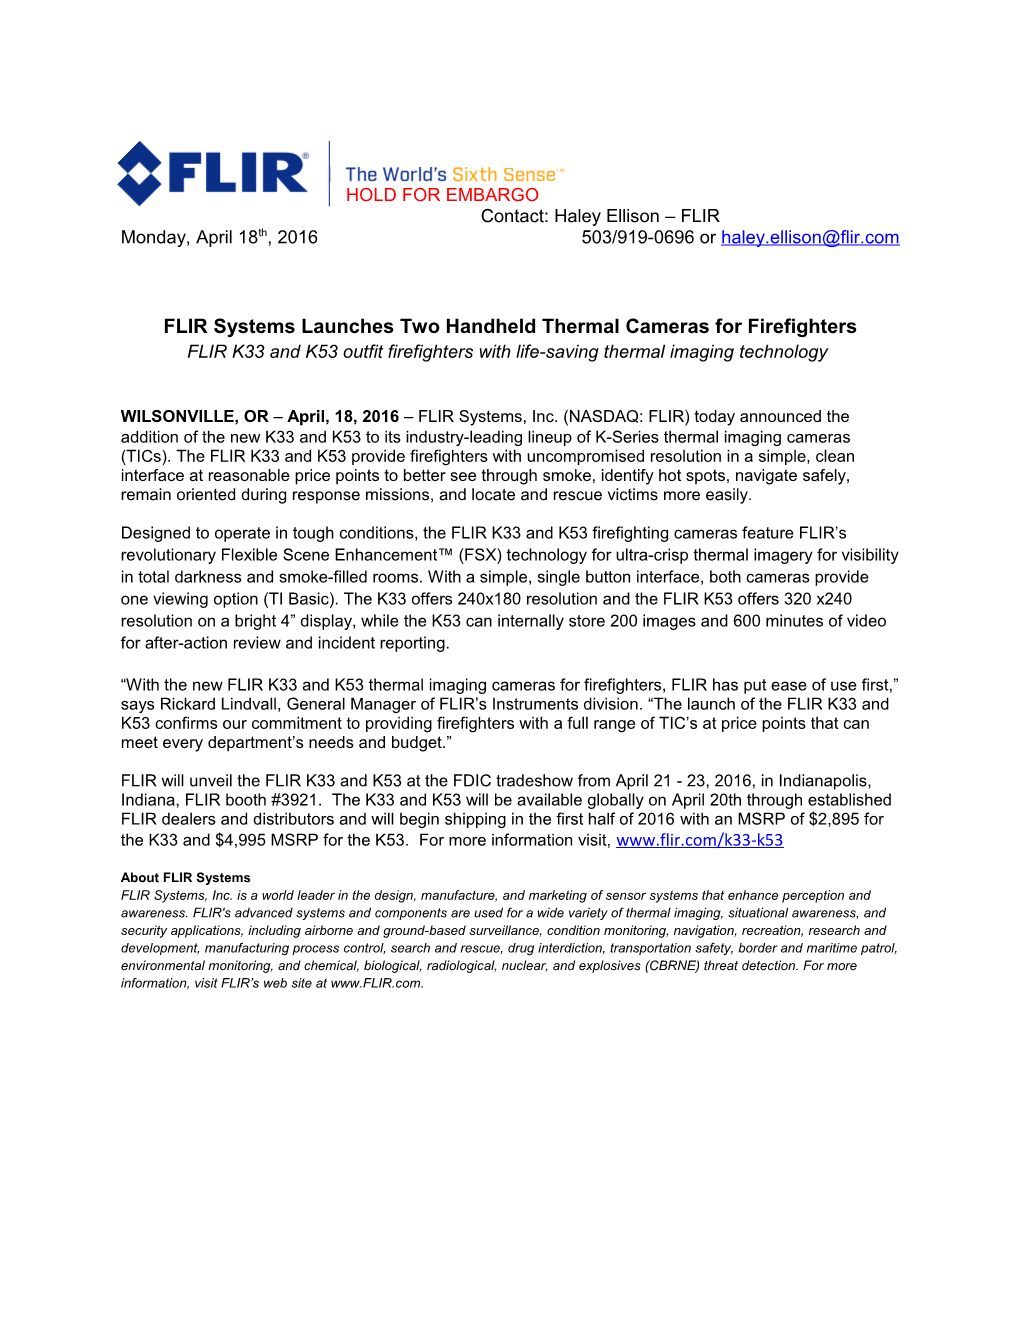 FLIR Systems Launches Two Handheld Thermal Cameras for Firefighters